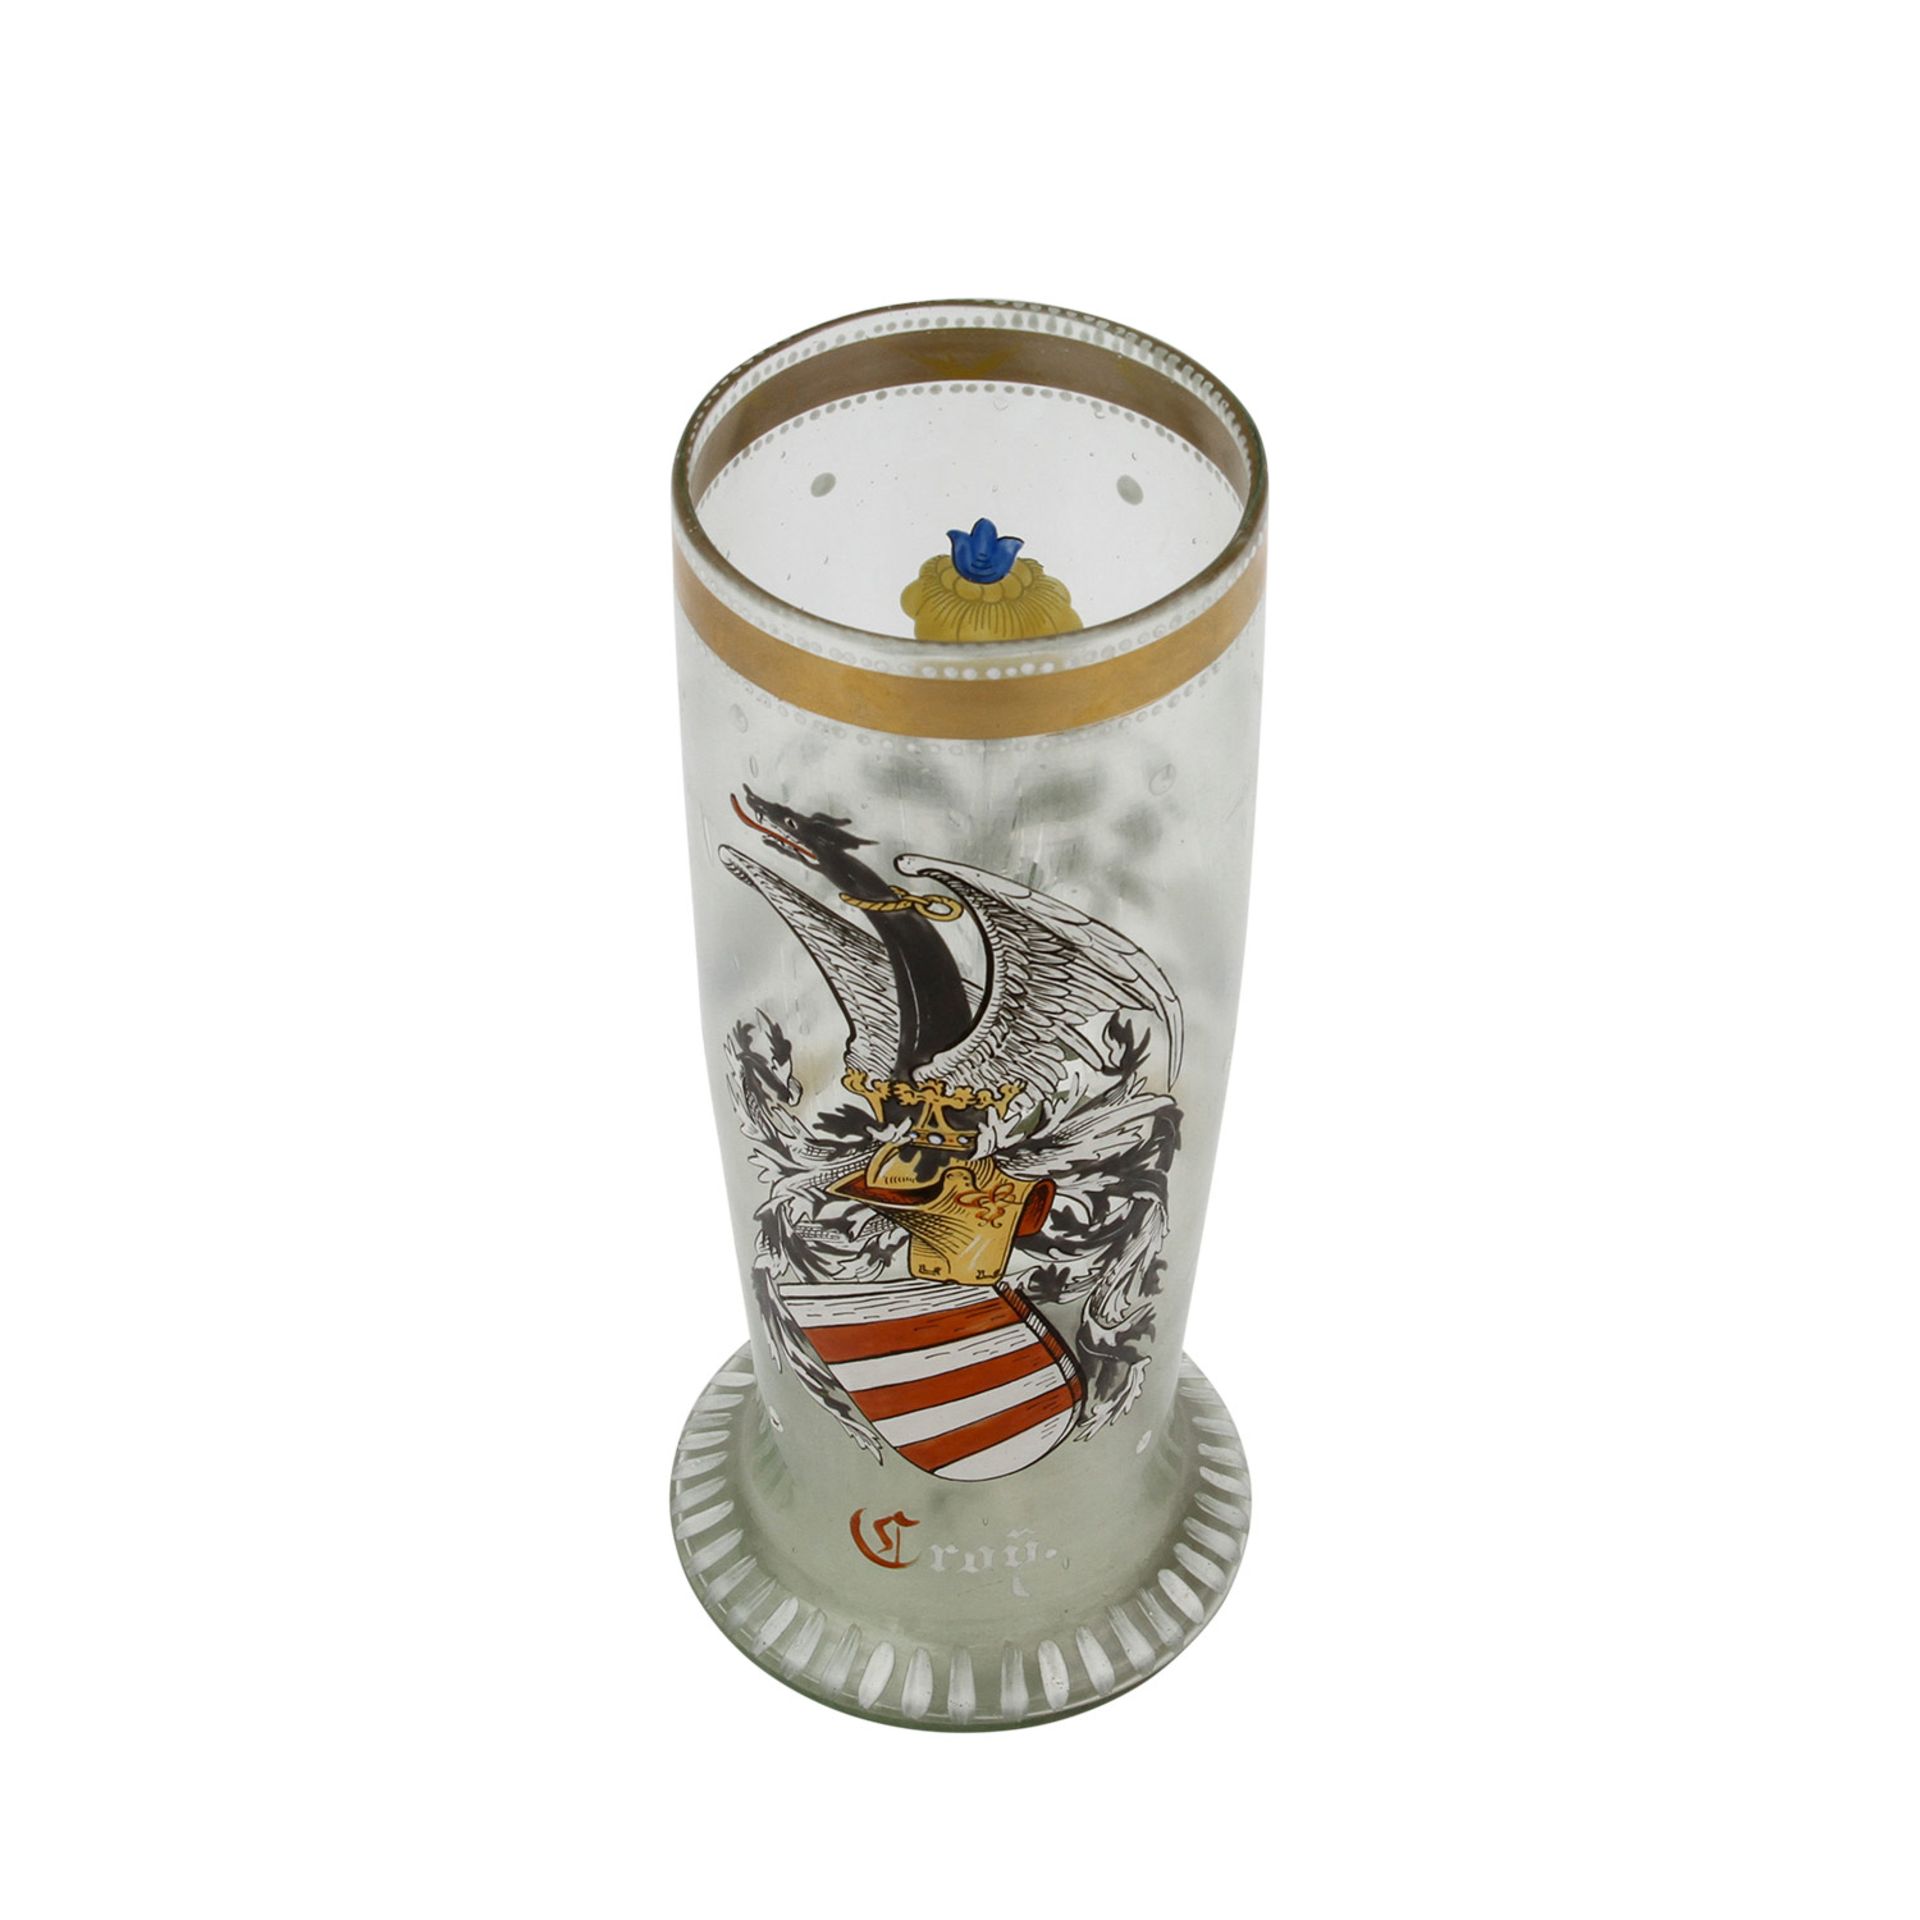 WAPPEN-BECHER Ende 19.Jh.,farbloses Glas mit farbiger Emailbemalung, gold staffiert, H: 22,5 cm. - Image 3 of 7